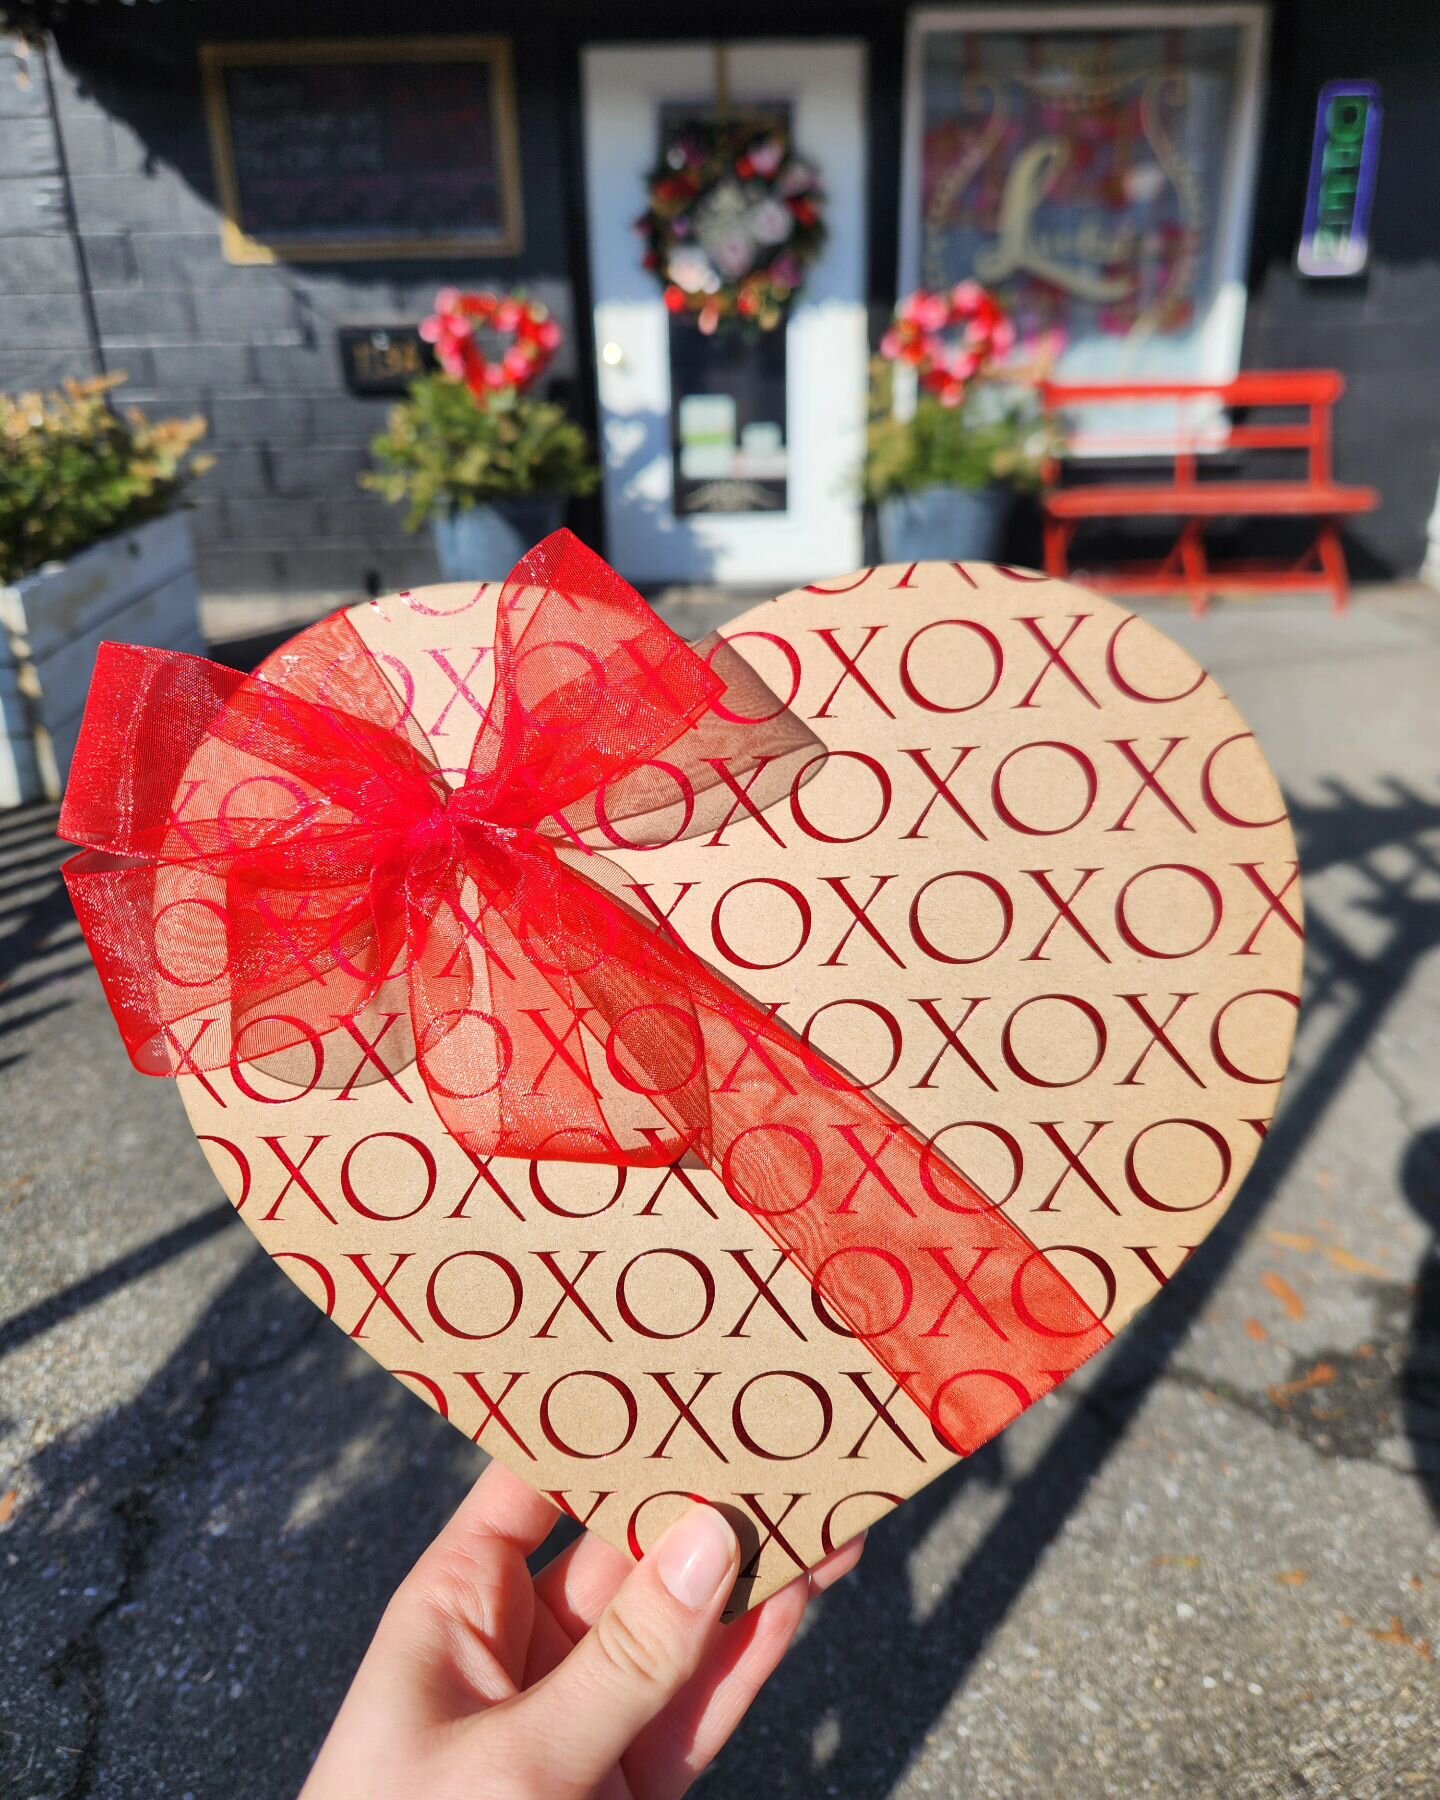 Your loved one will love this 💘 Open today until 6 

There is still time to preorder strawberries for 11th,12th,13,14th pick up 🍓

Open every day Sunday -&gt; Thursday 11-5 and Friday -&gt; Saturday 10-6 

You can also find us @cmm_on31marketstreet